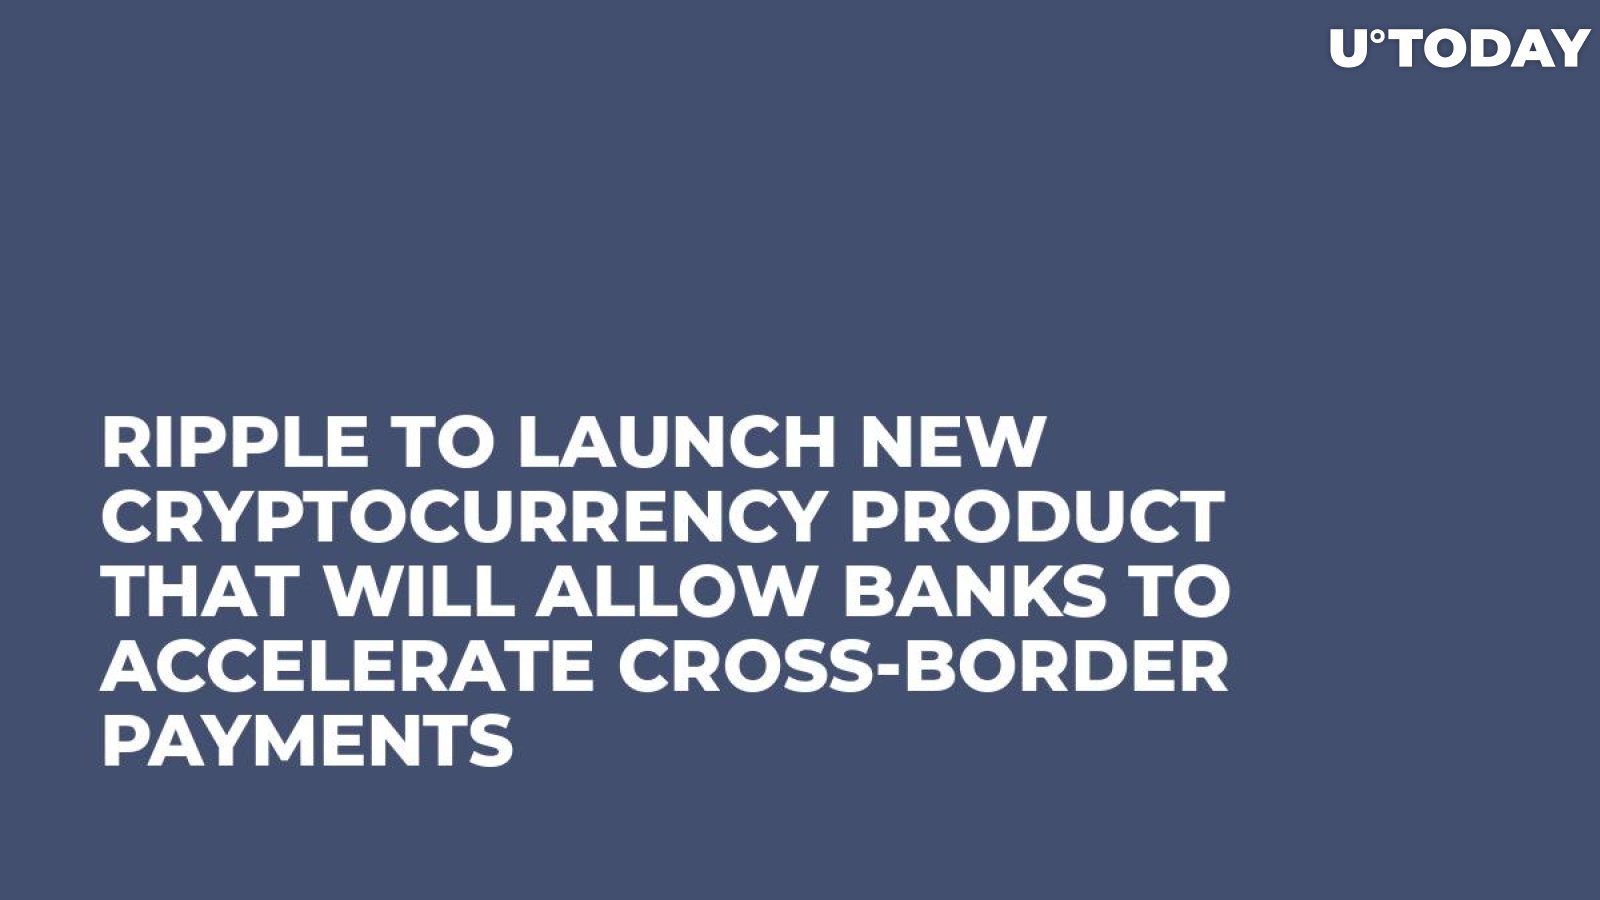 Ripple to Launch New Cryptocurrency Product That Will Allow Banks to Accelerate Cross-Border Payments